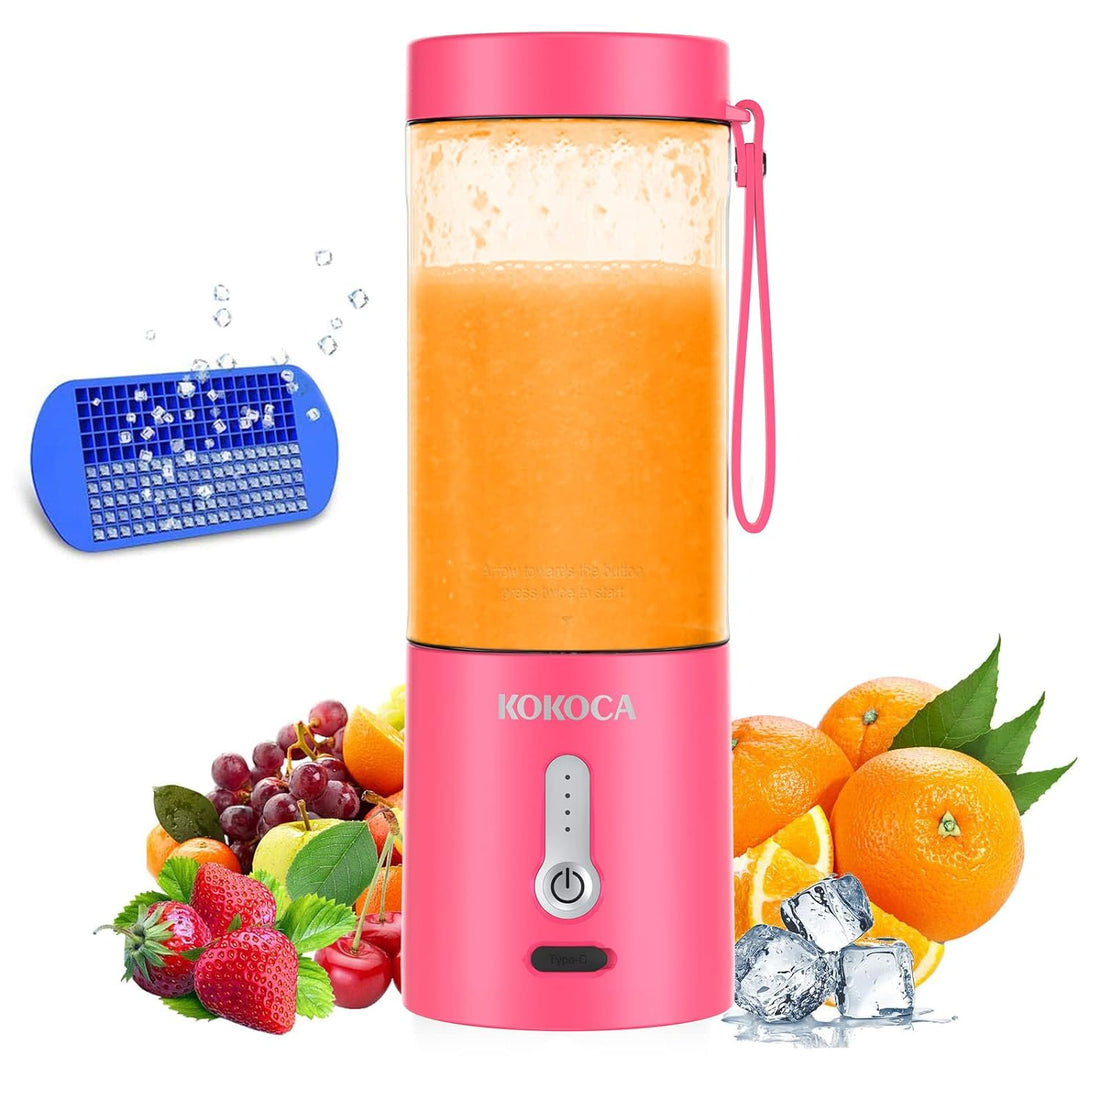 Portable Blender for Shakes and Smoothies, KOKOCA Personal Travel Blender for Protein with 4000mAh USB Rechargeable Battery, Crush Ice, Frozen Fruit and Drinks, 18 oz Mini Cup